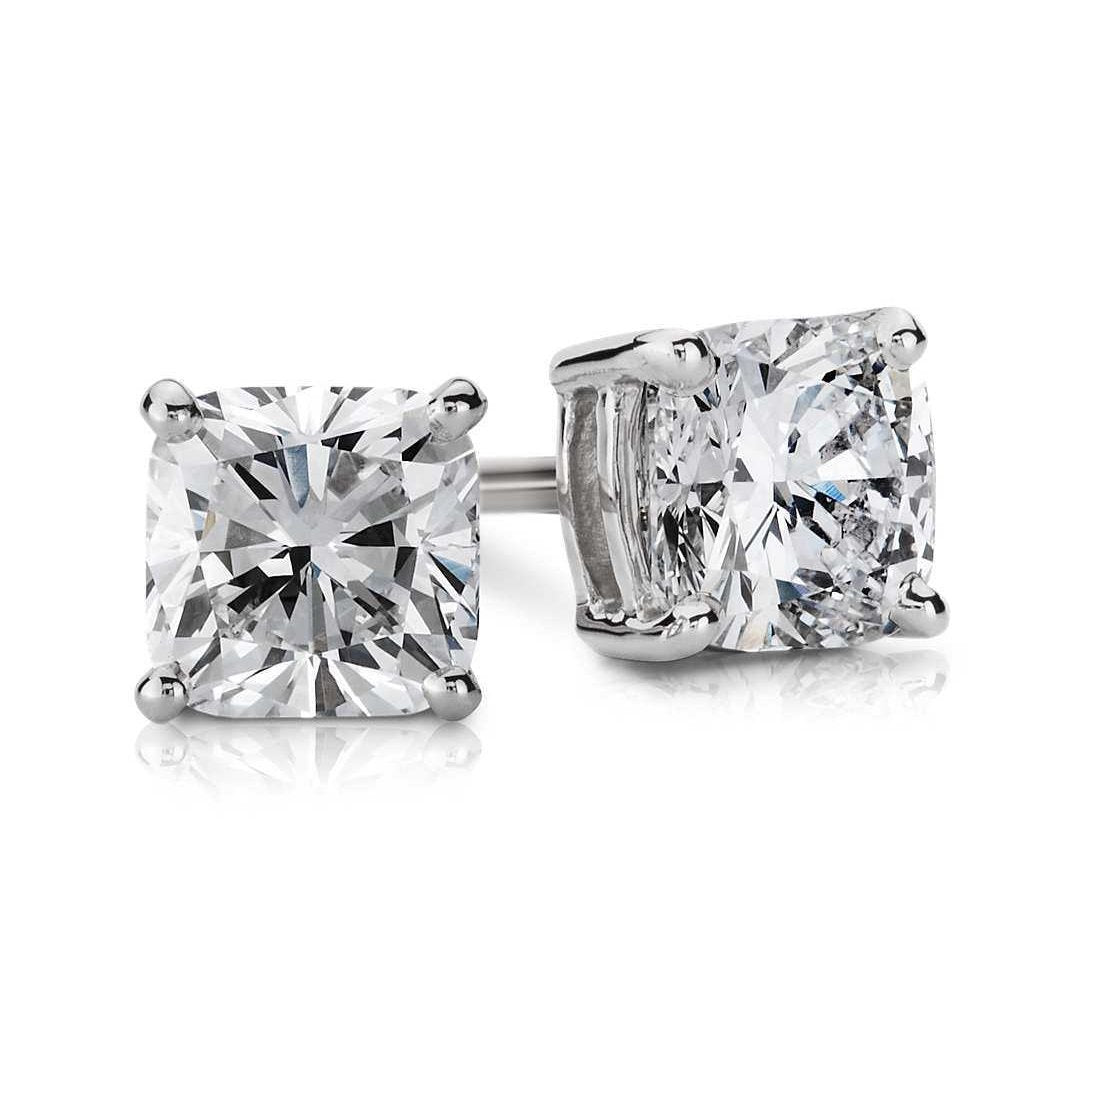 Prong Set 2 Ct Cushion Cut Natural Diamond Stud Earring Solid White Gold 14K